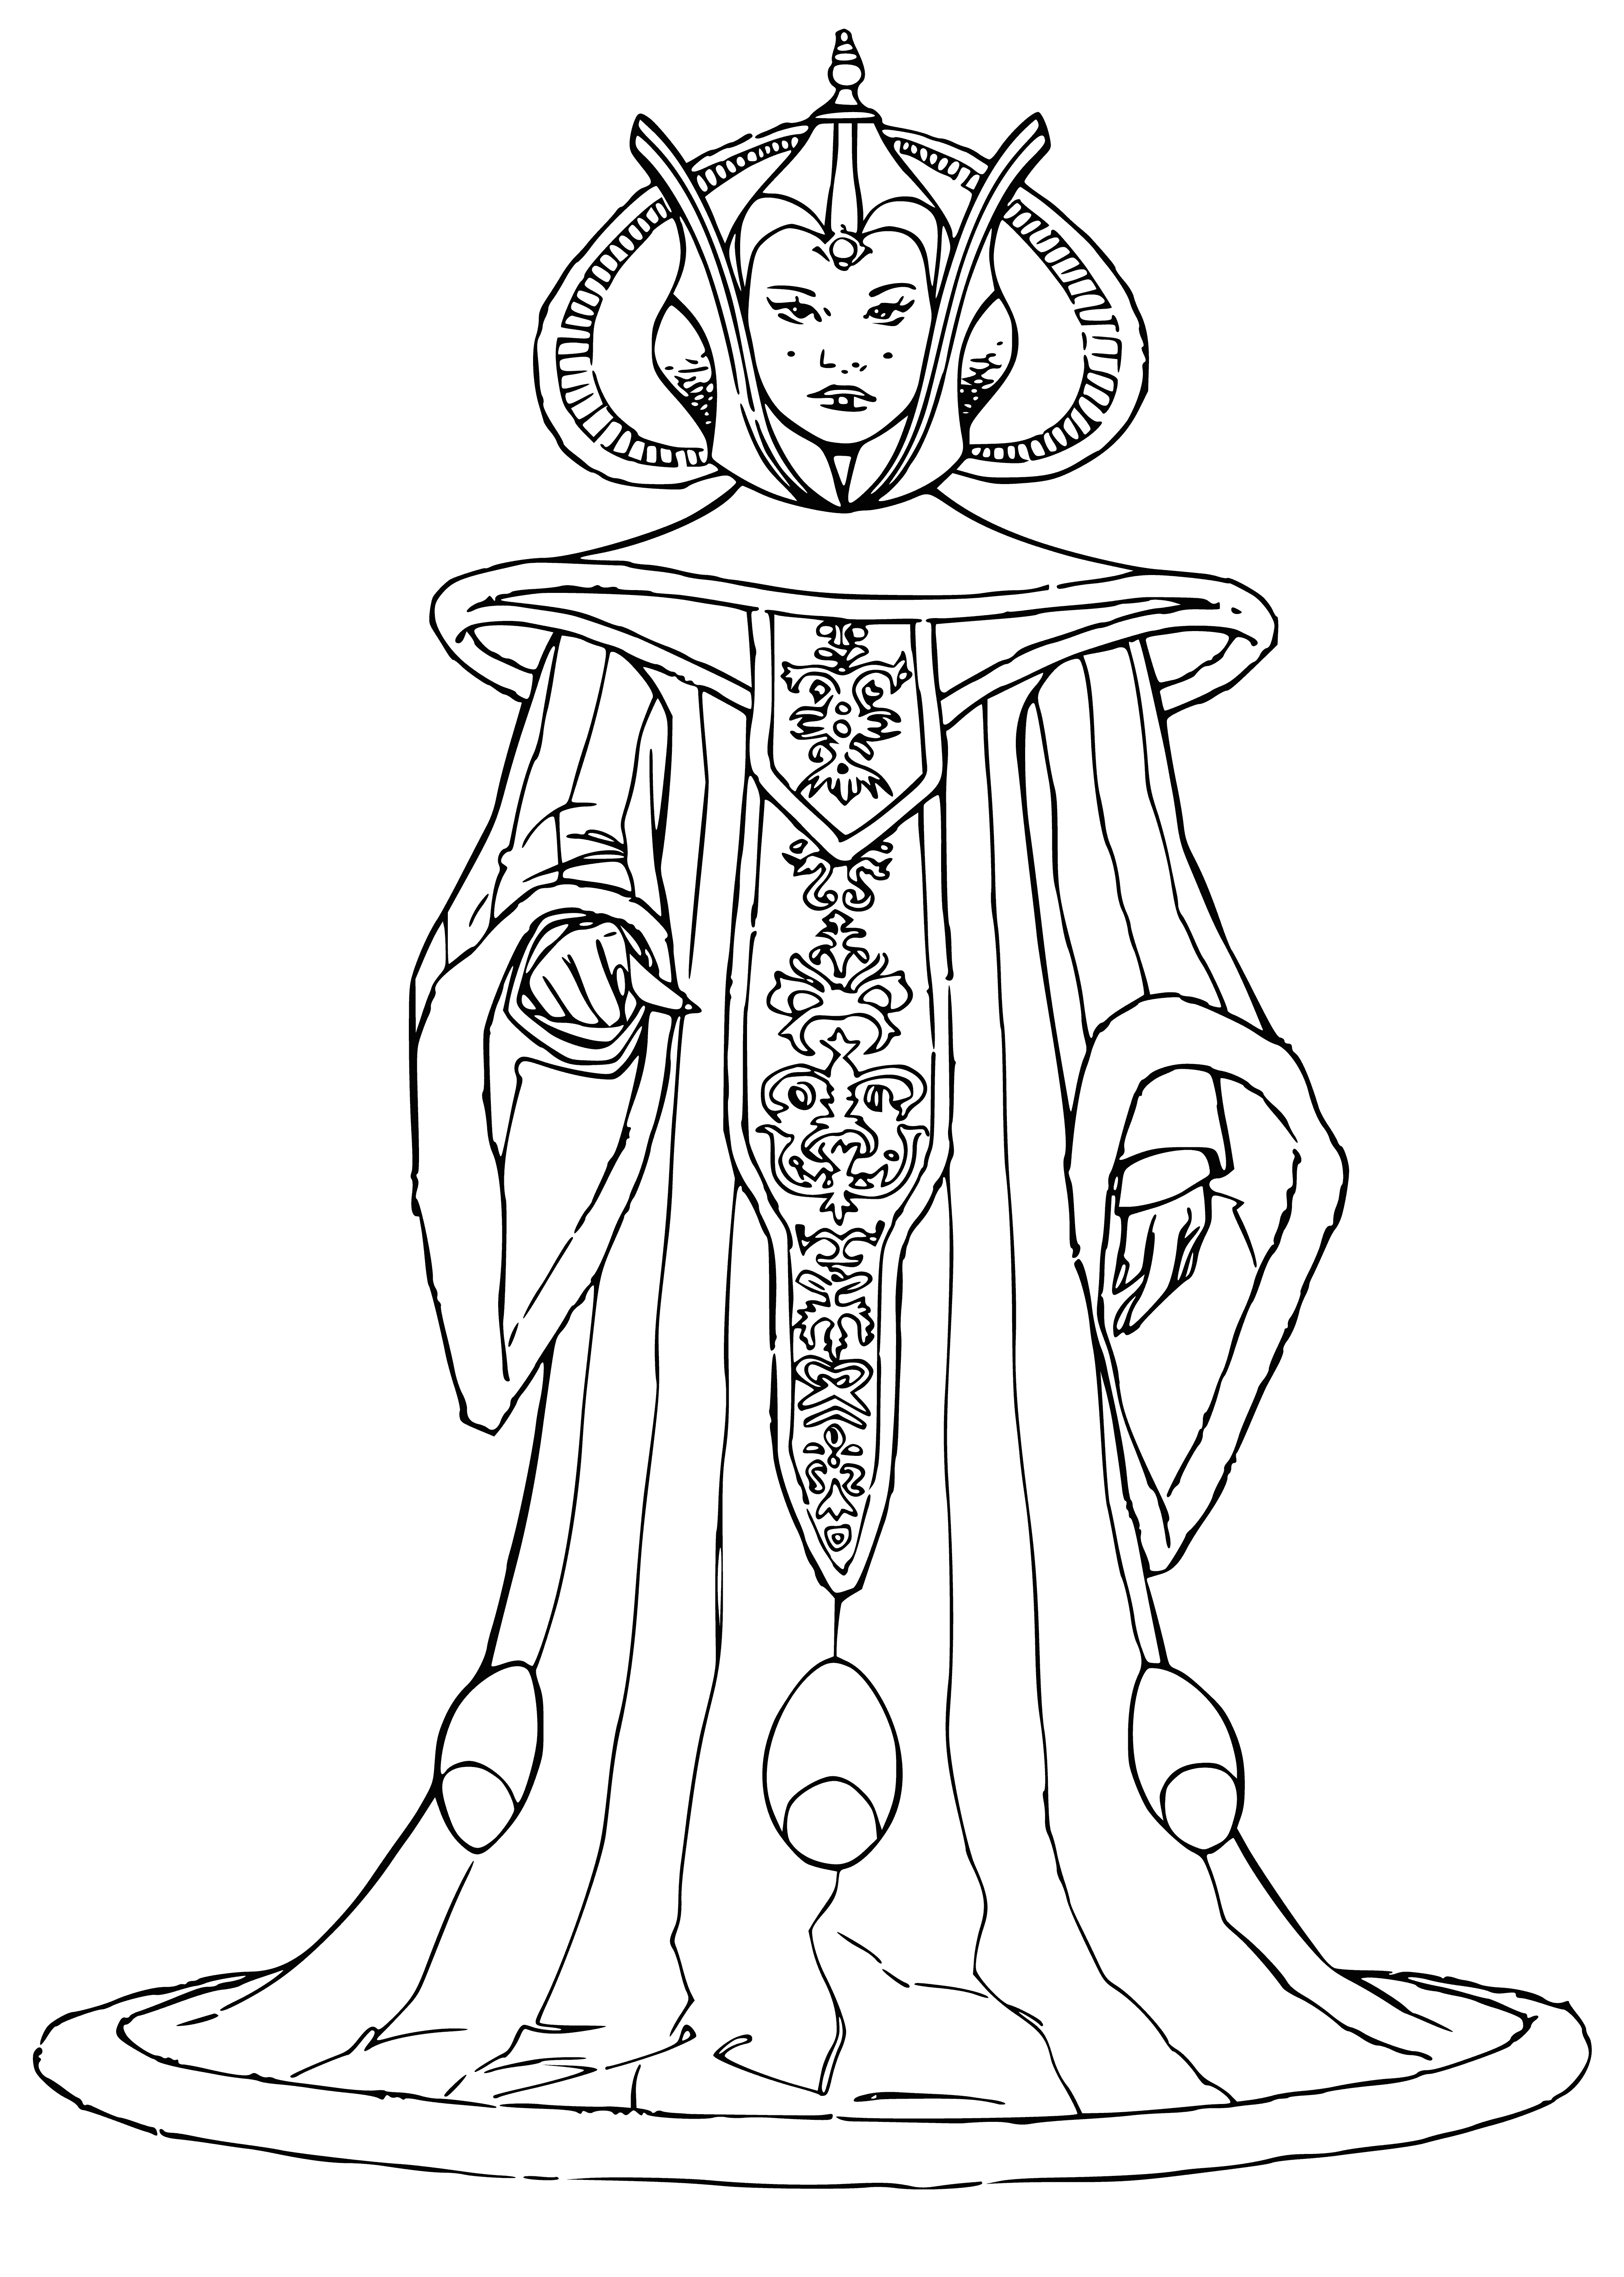 coloring page: Amidala stands regal & important in a grand room, wearing a gown w/ long train, intricate hairstyle & jeweled headpiece.